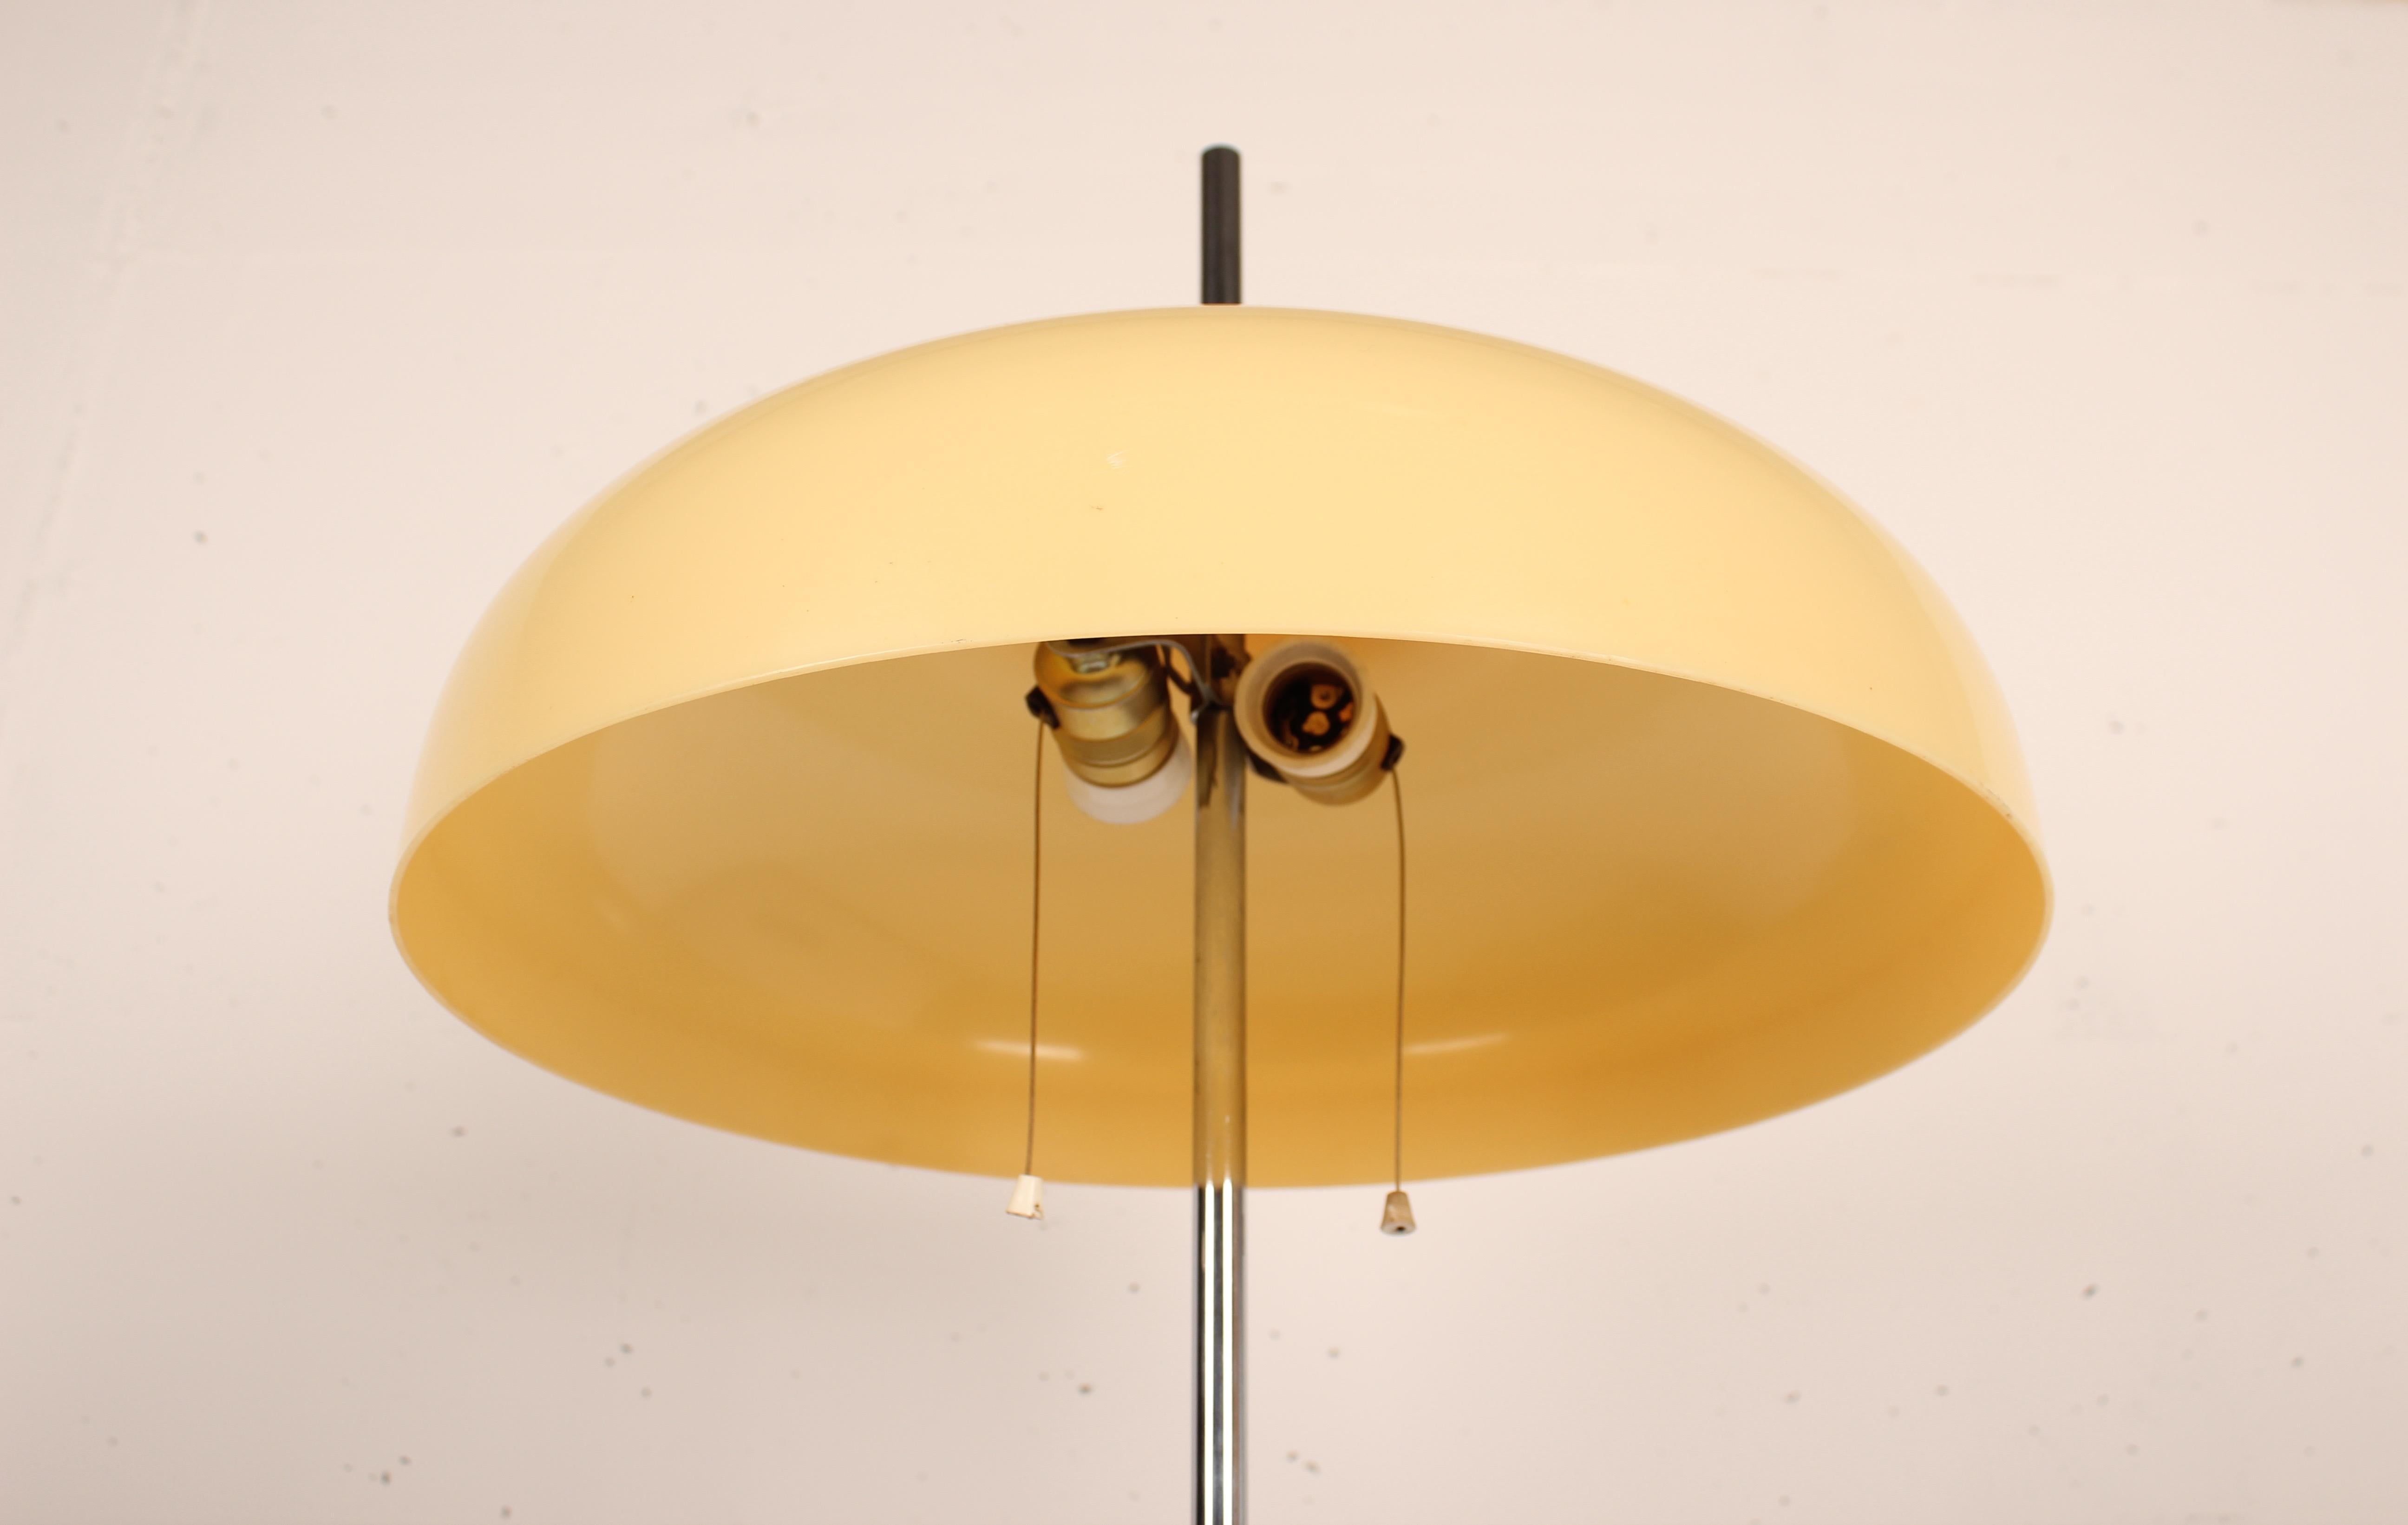 Metal Mushroom Floor Lamp with Tulip Base Designed by A. Blanc for Tramo, Spain 1968 For Sale